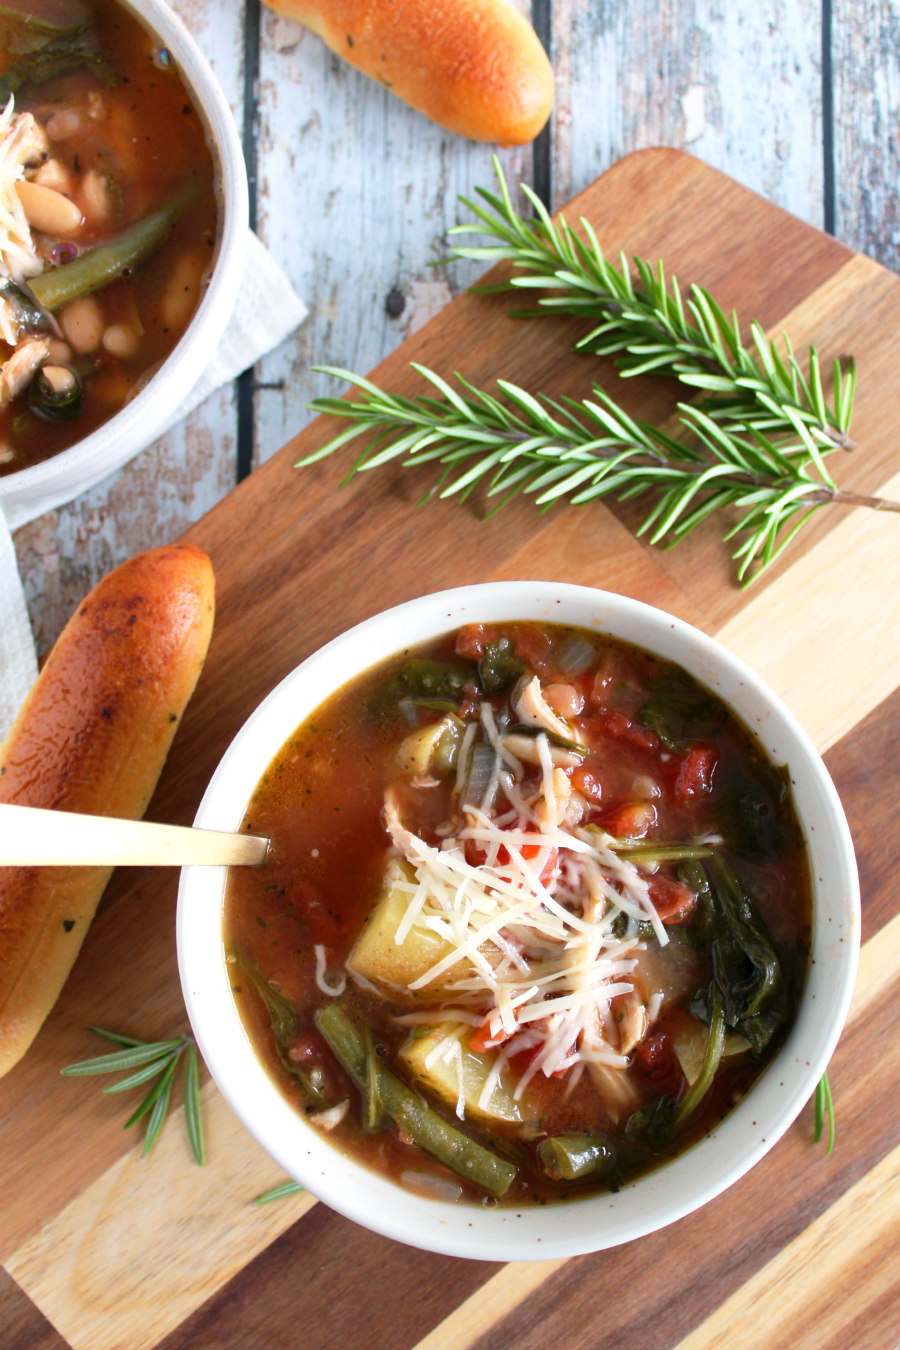 Nothing beats comfort food on a chilly evening, and chicken soup is always a winner! Come home to this Slow Cooker Italian Chicken Soup for your weeknight dinner. It's your new favorite easy slow cooker soup!